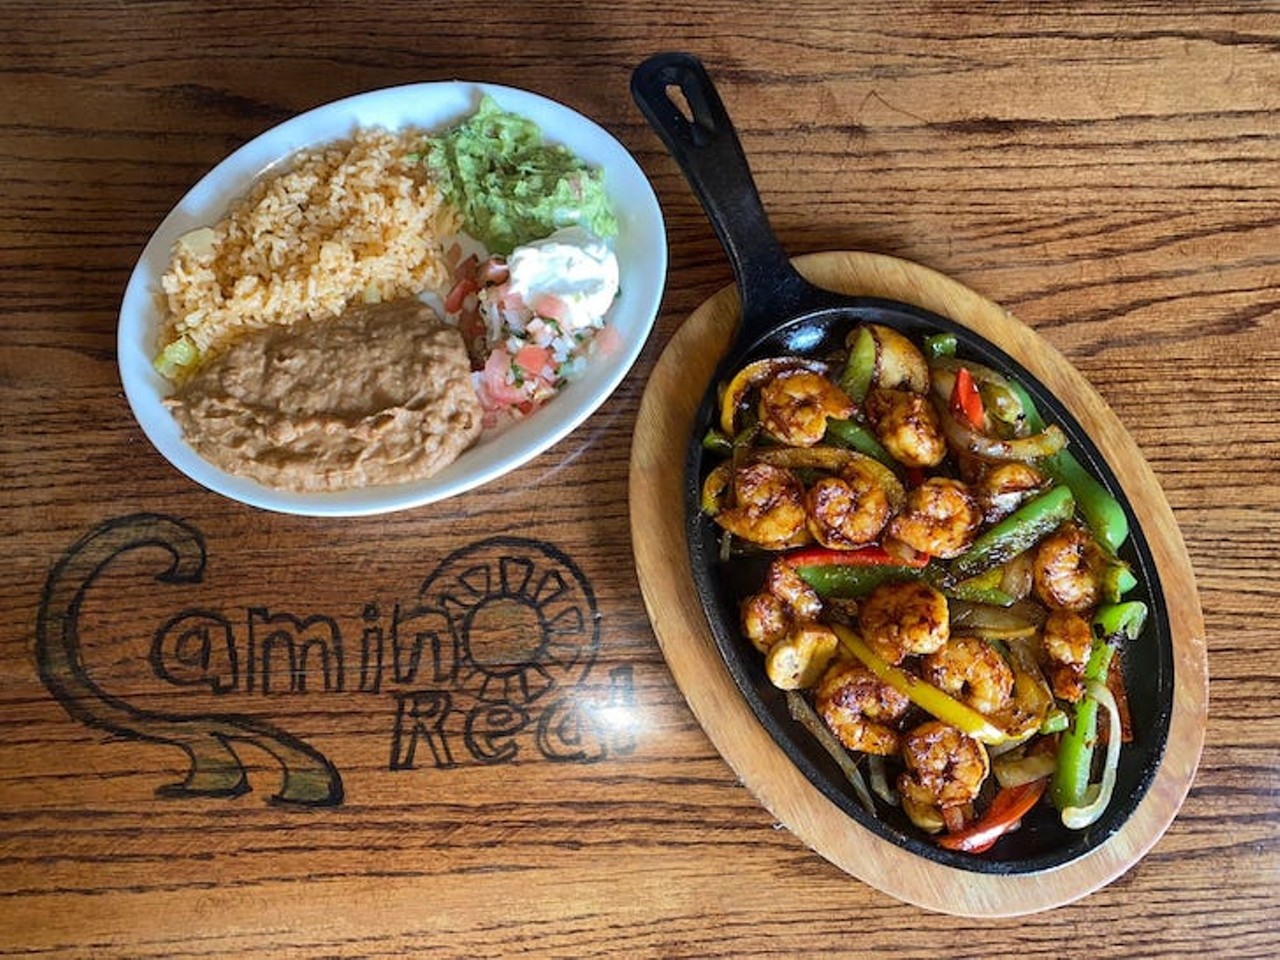 Camino Real
3851 Fort St., Wyandotte; 734-258-8790; restaurantcaminoreal.com
Camino Real brings the flavors of Mexico to Downriver. From ceviche to tortas, you can find something to satisfy your craving.